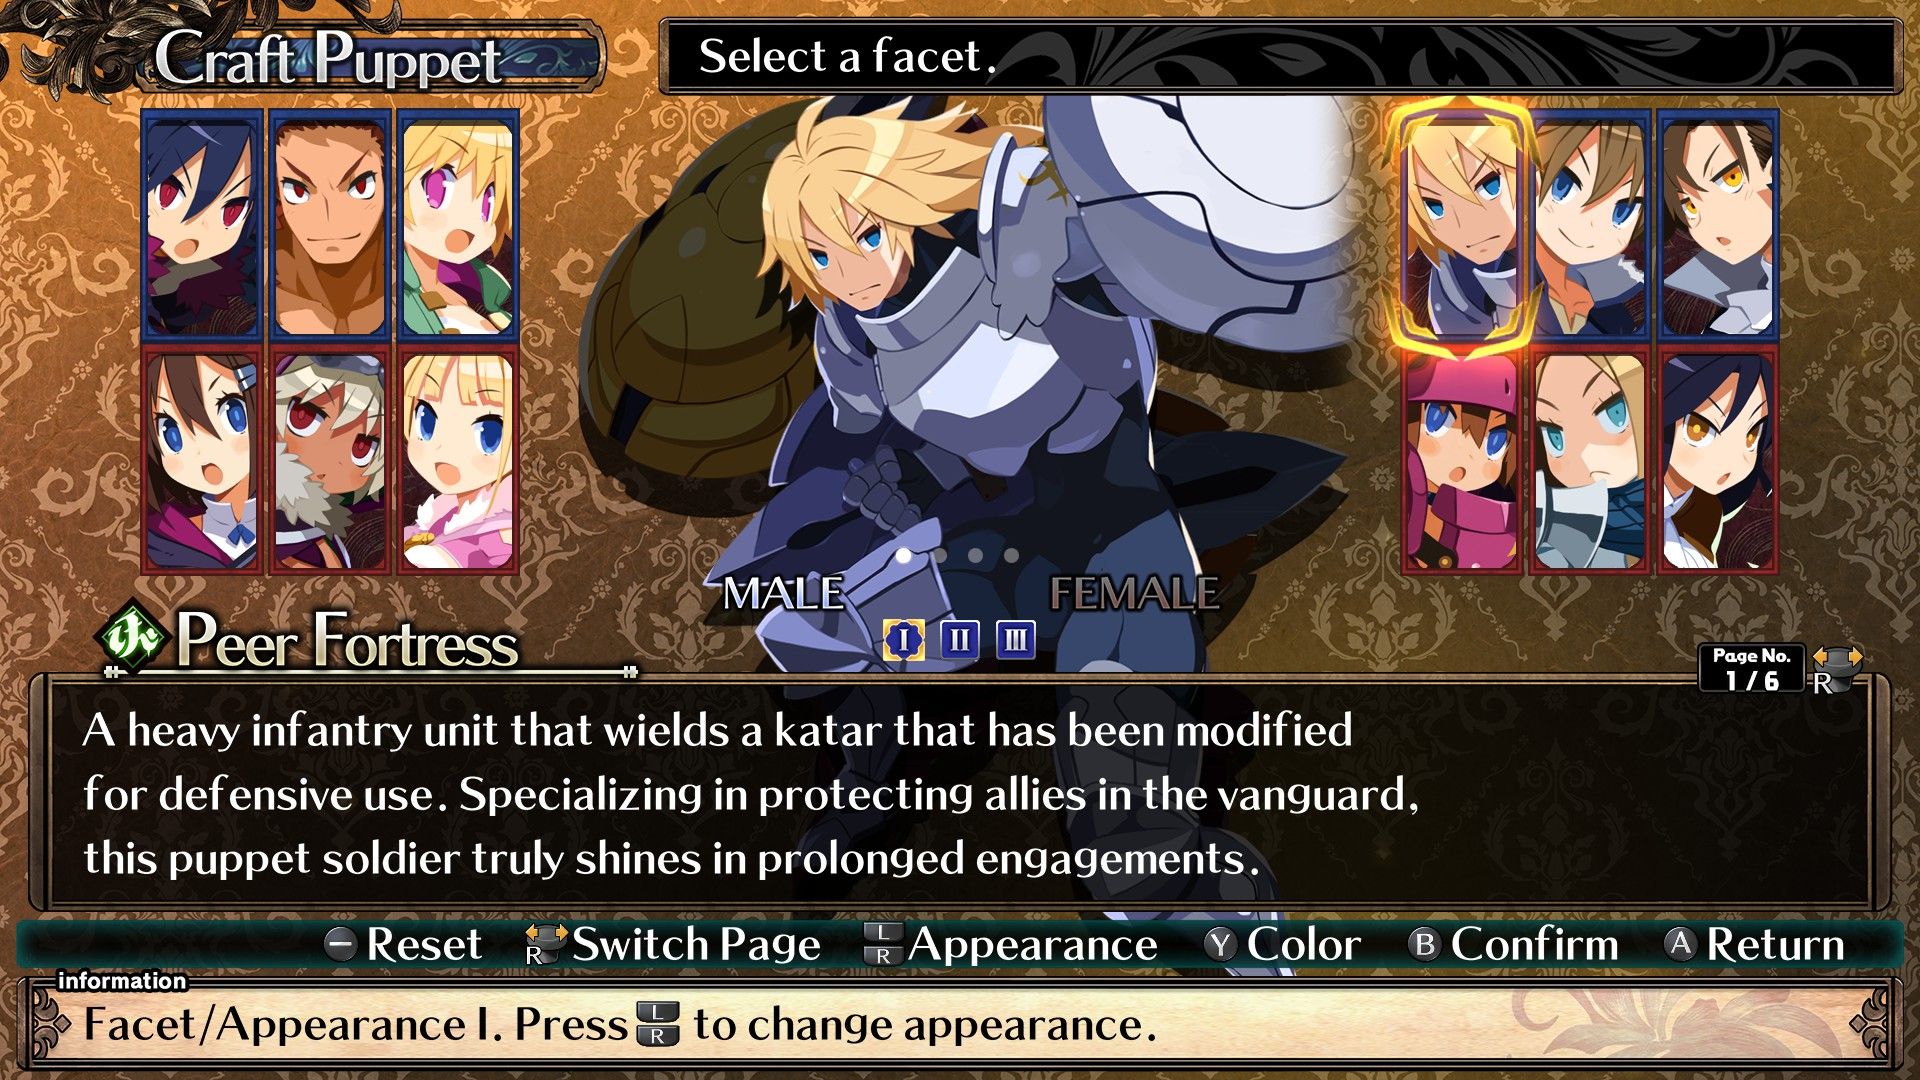 Labyrinth Of Galleria: The Moon Society Peer Fortress character creation screen showing the male character and class description.